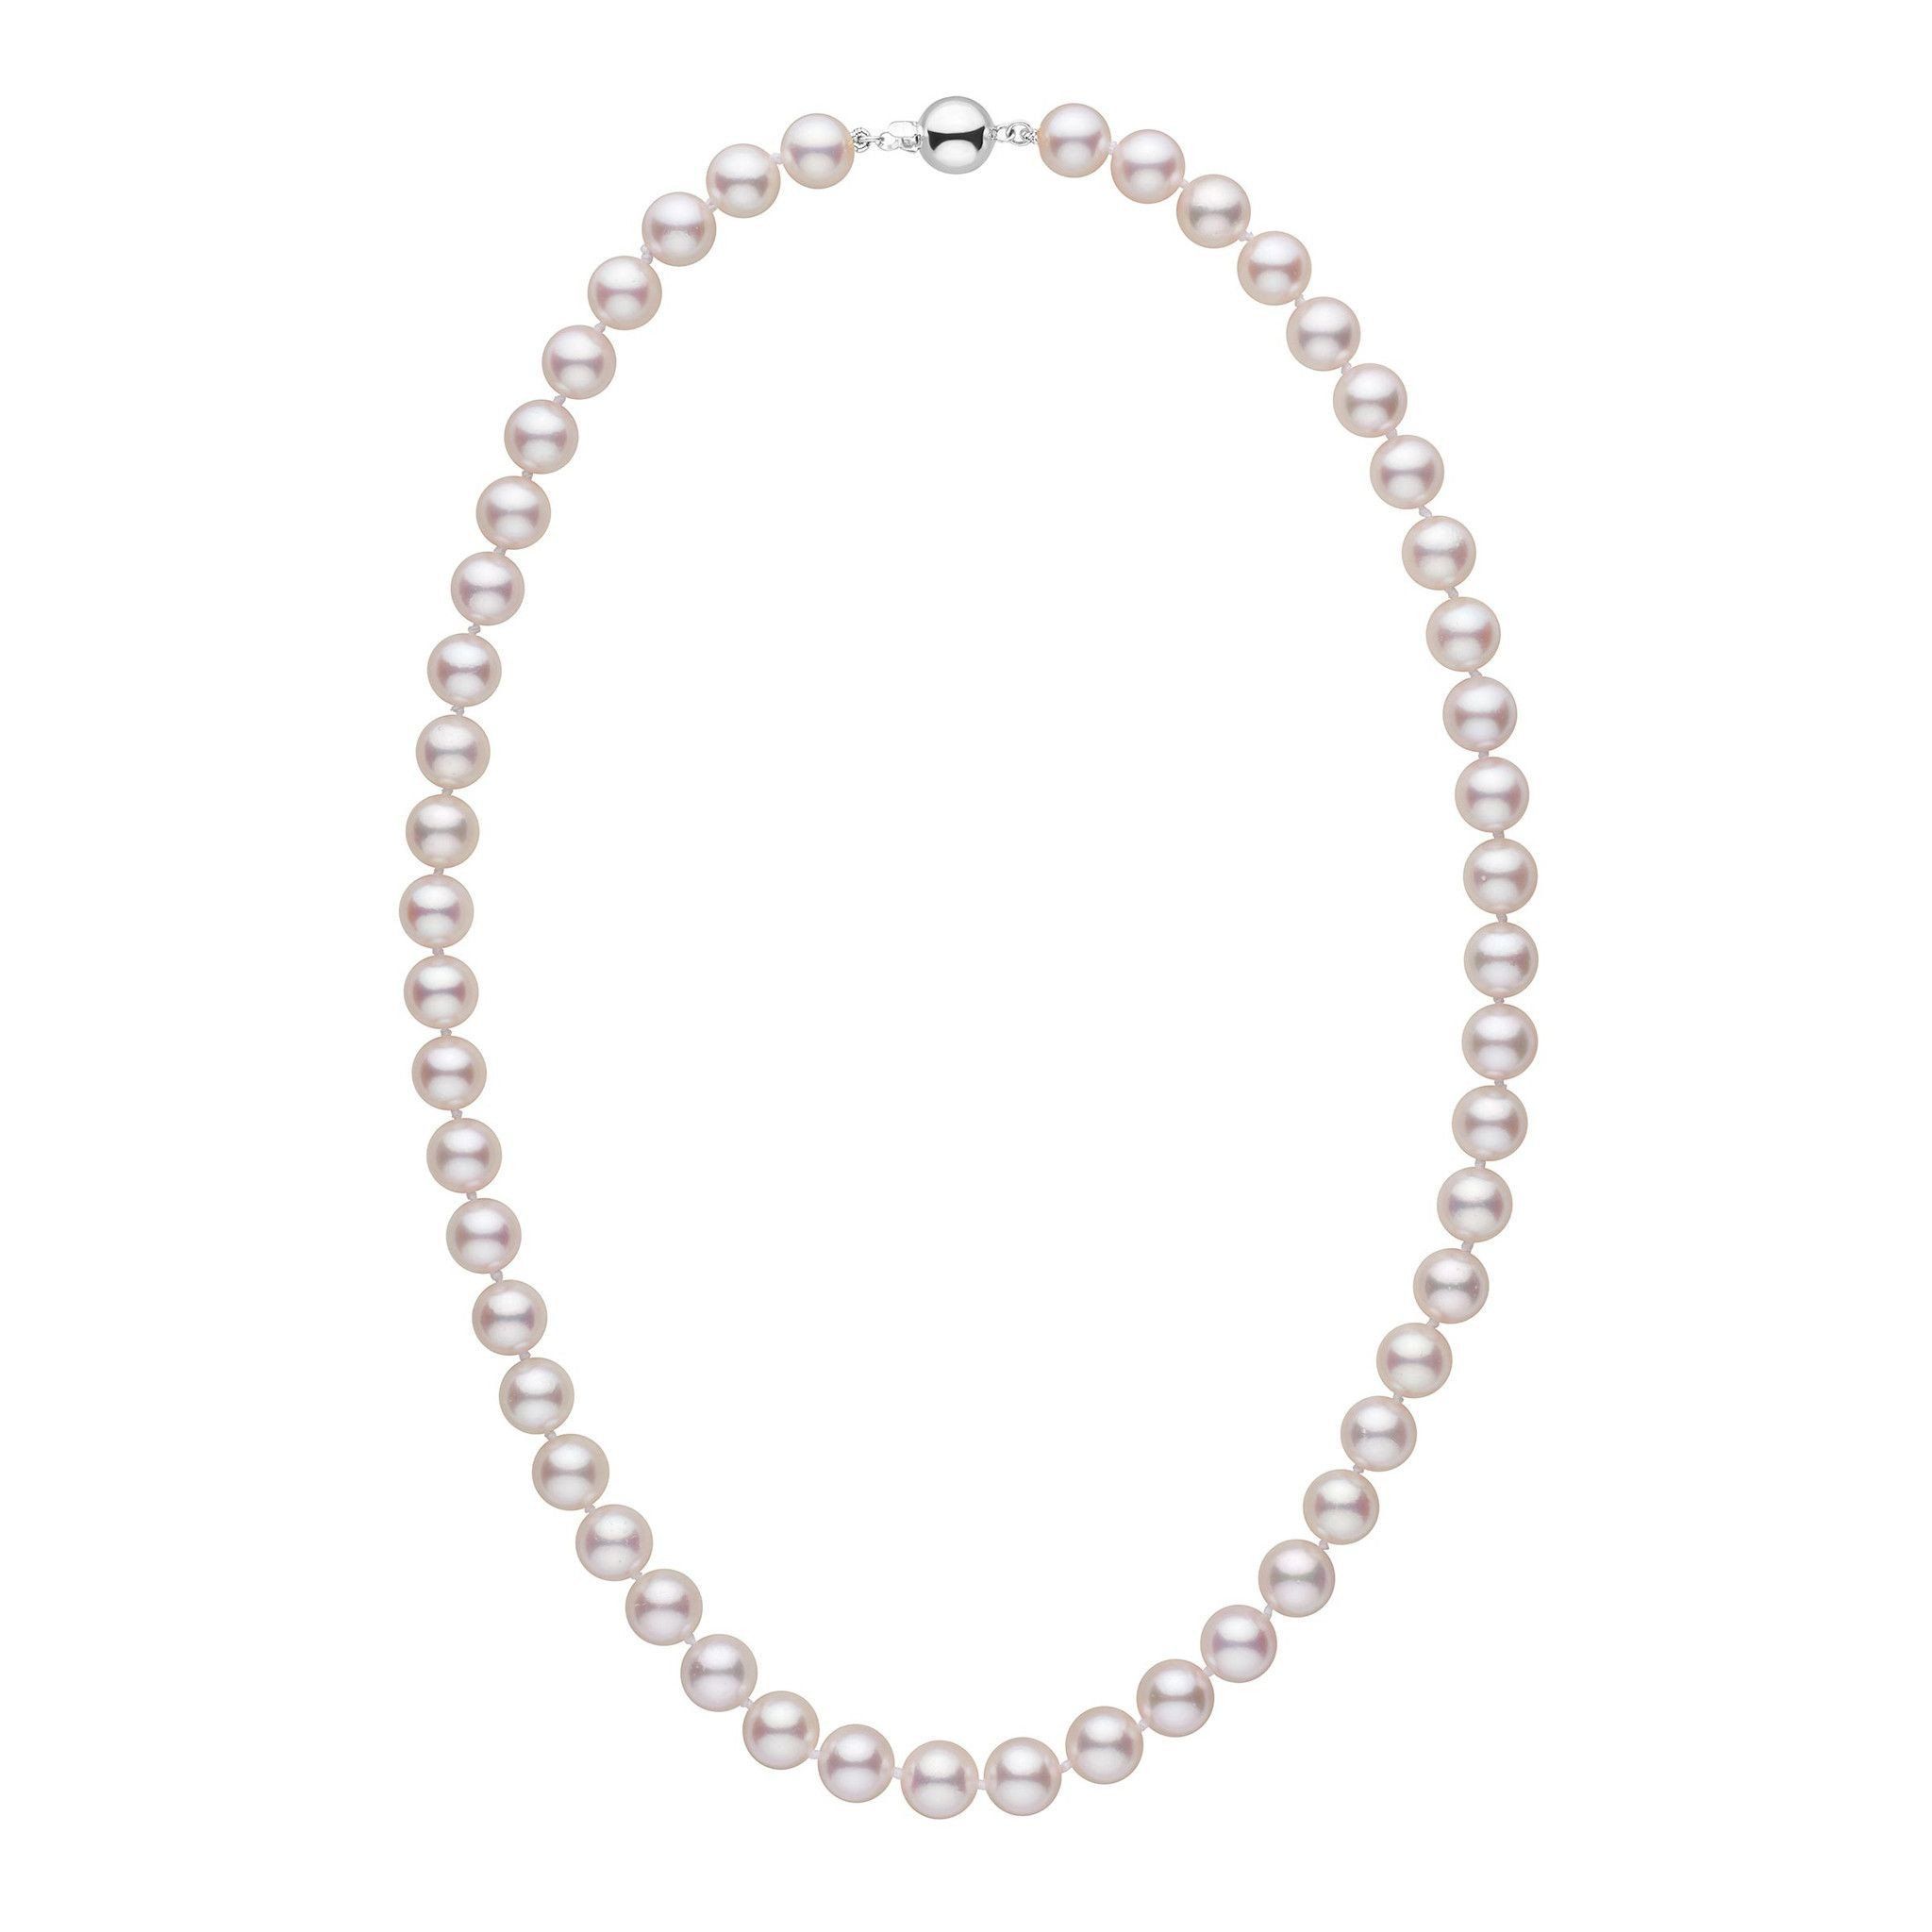 8.0-8.5 mm 18 inch AA+ White Akoya Pearl Necklace white gold